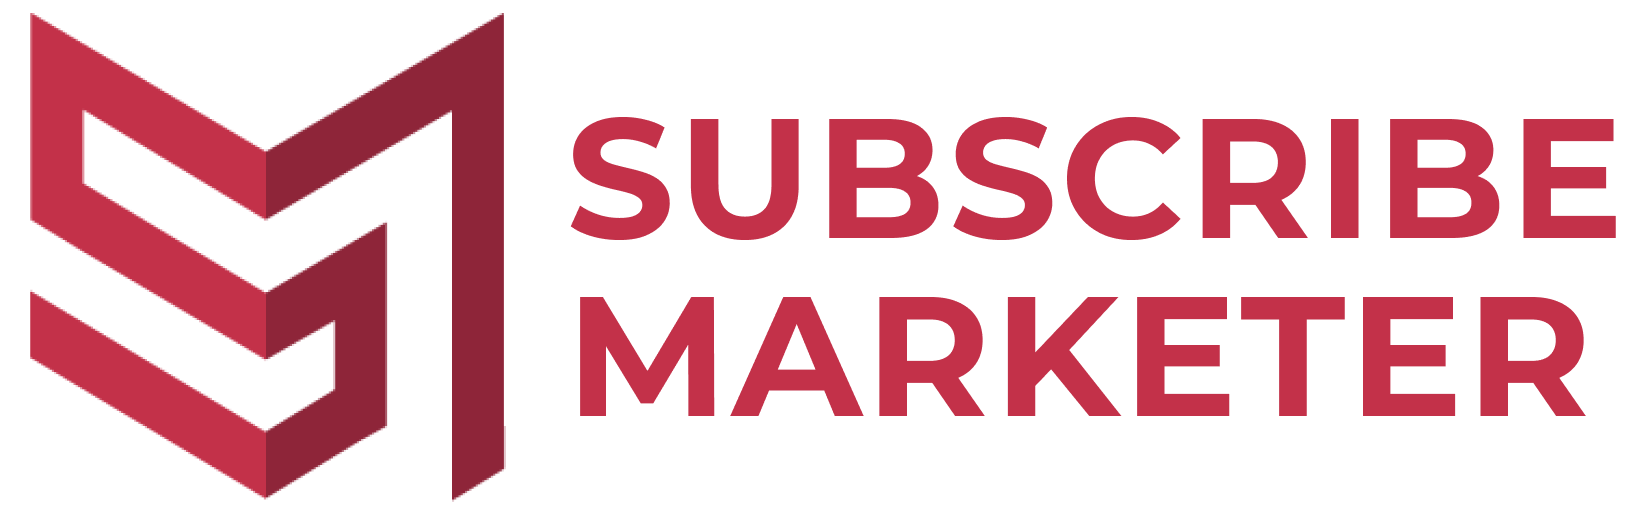 Subscribe Marketer